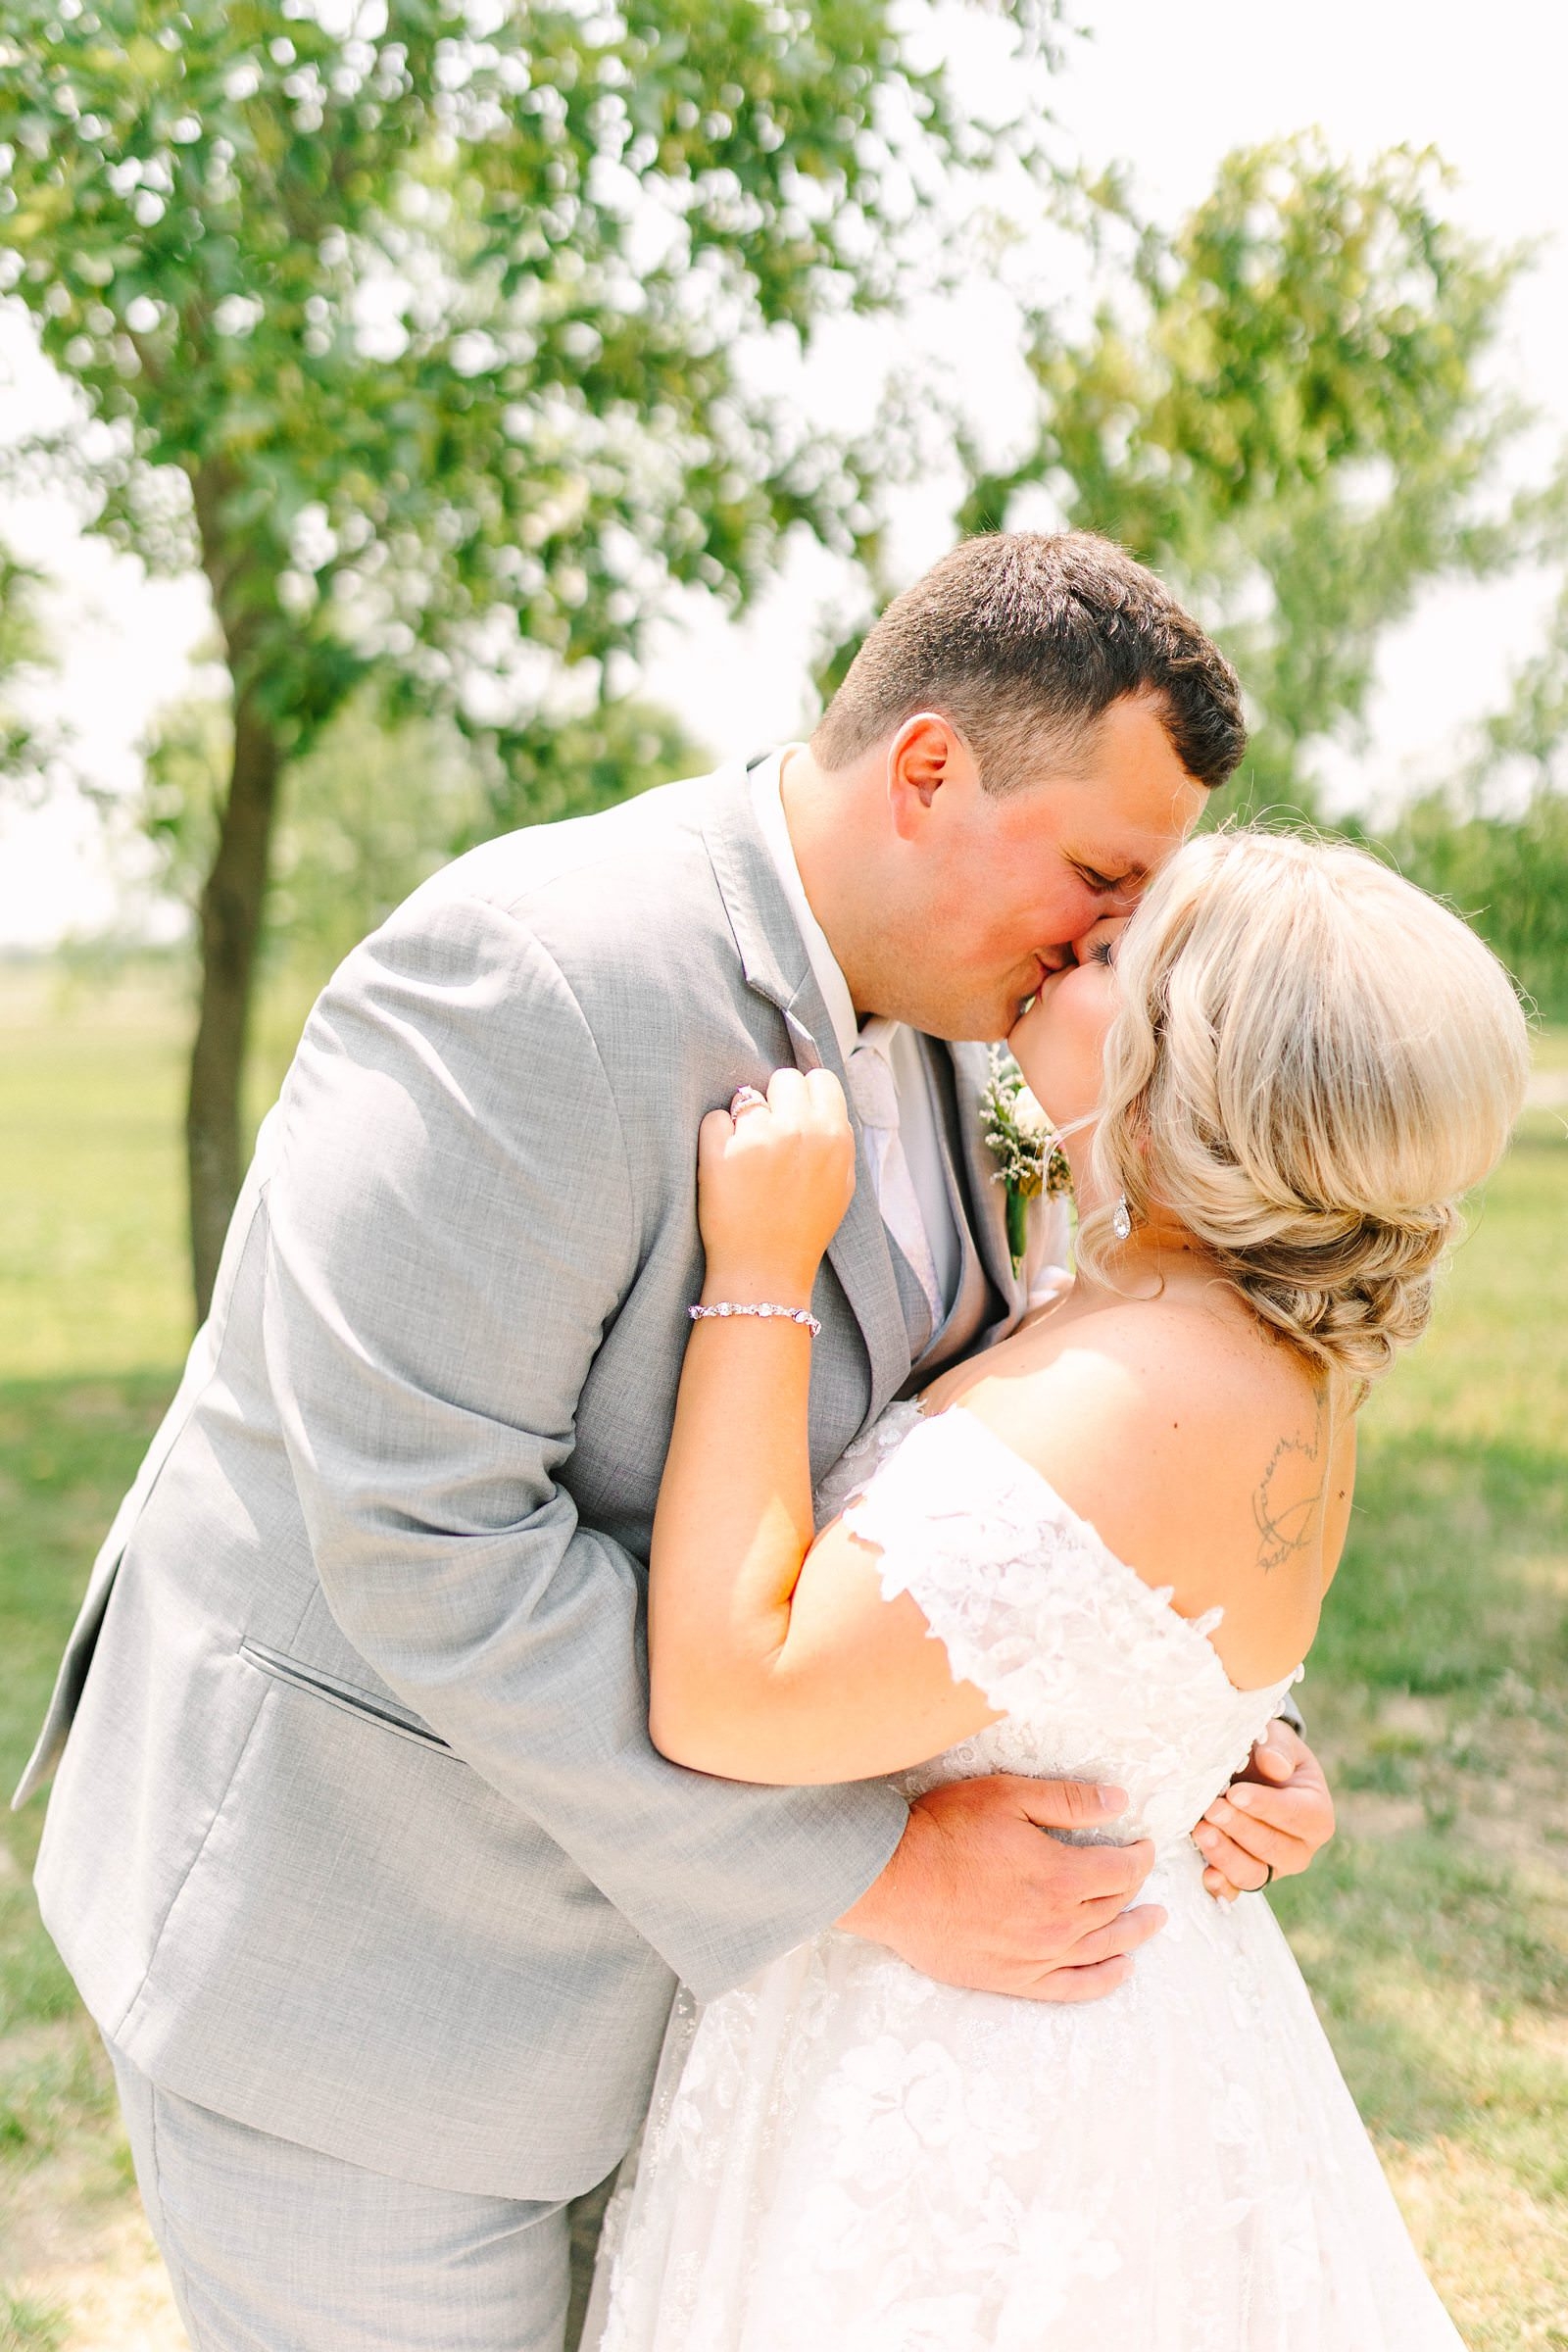 A Sunny Summer Wedding at Friedman Park in Newburgh Indiana | Paige and Dylan | Bret and Brandie Photography090.jpg